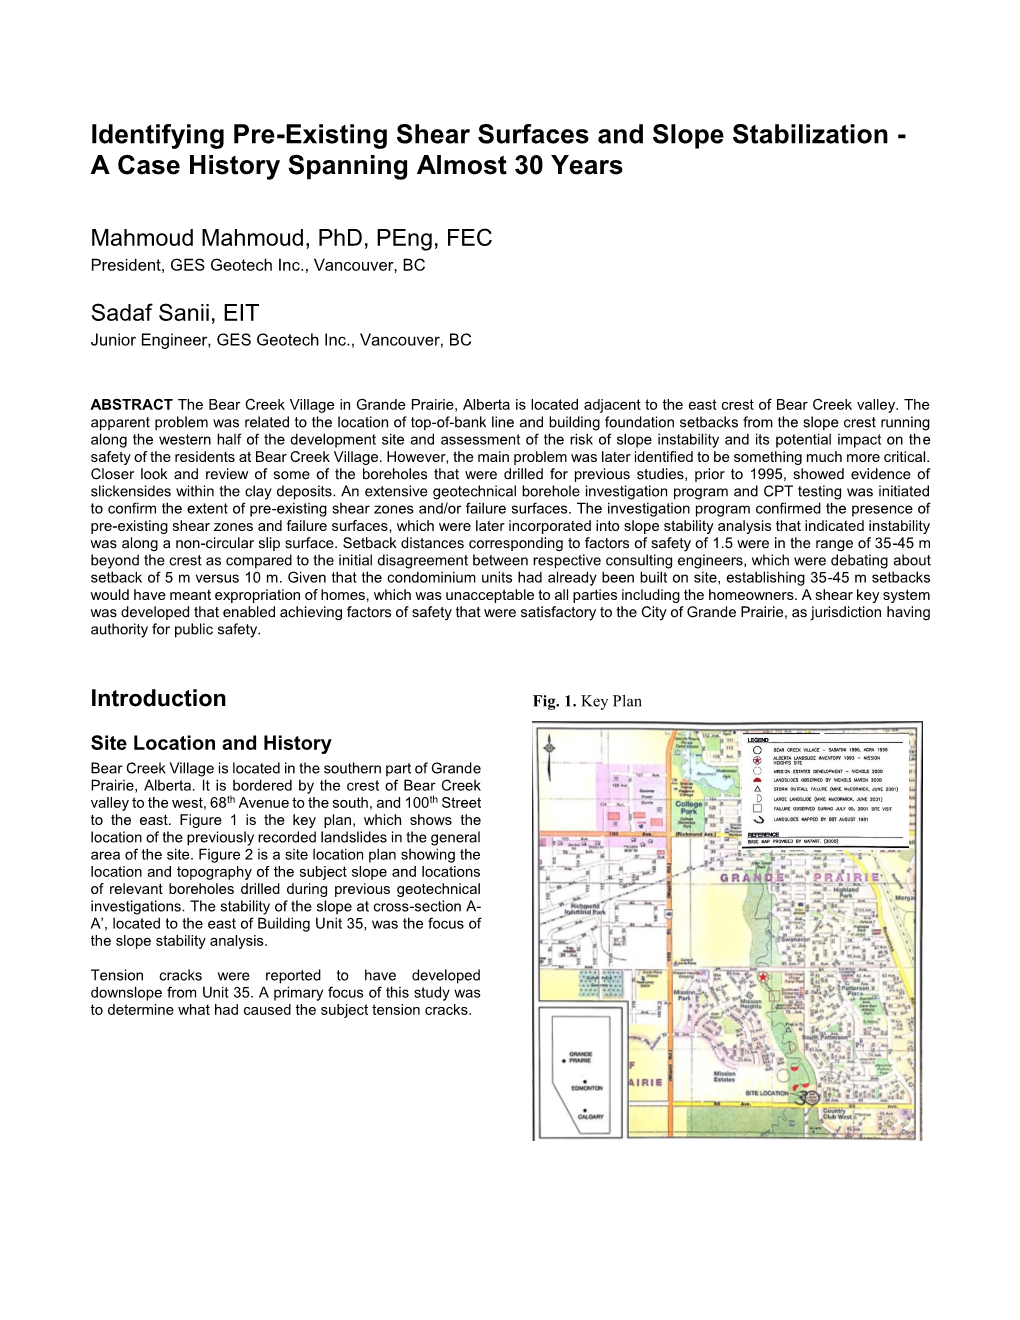 Identifying Pre-Existing Shear Surfaces and Slope Stabilization - a Case History Spanning Almost 30 Years